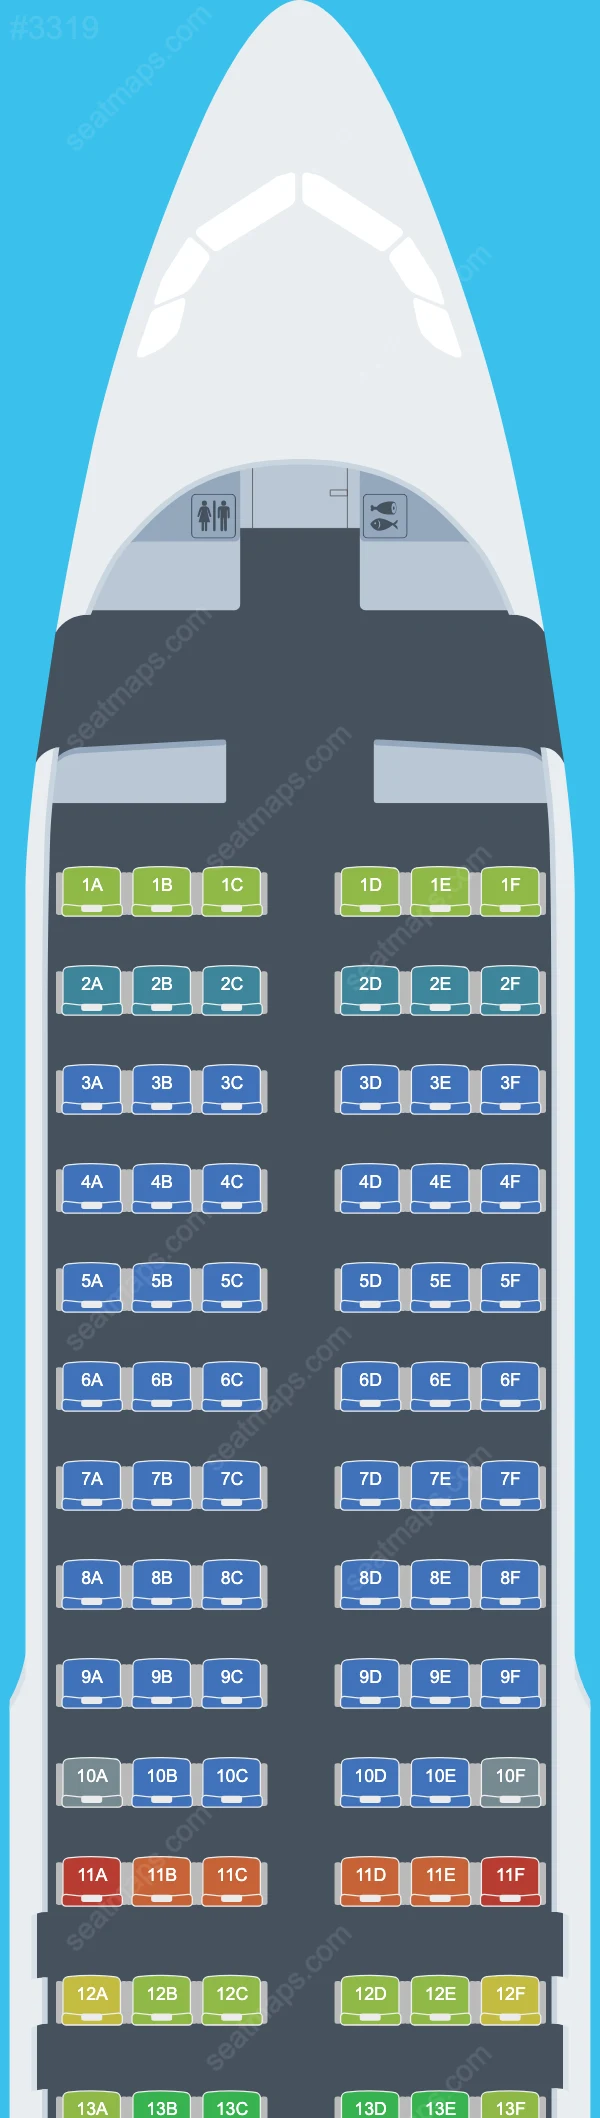 Spring Airlines Airbus A320 Seat Maps A320-200 V.1